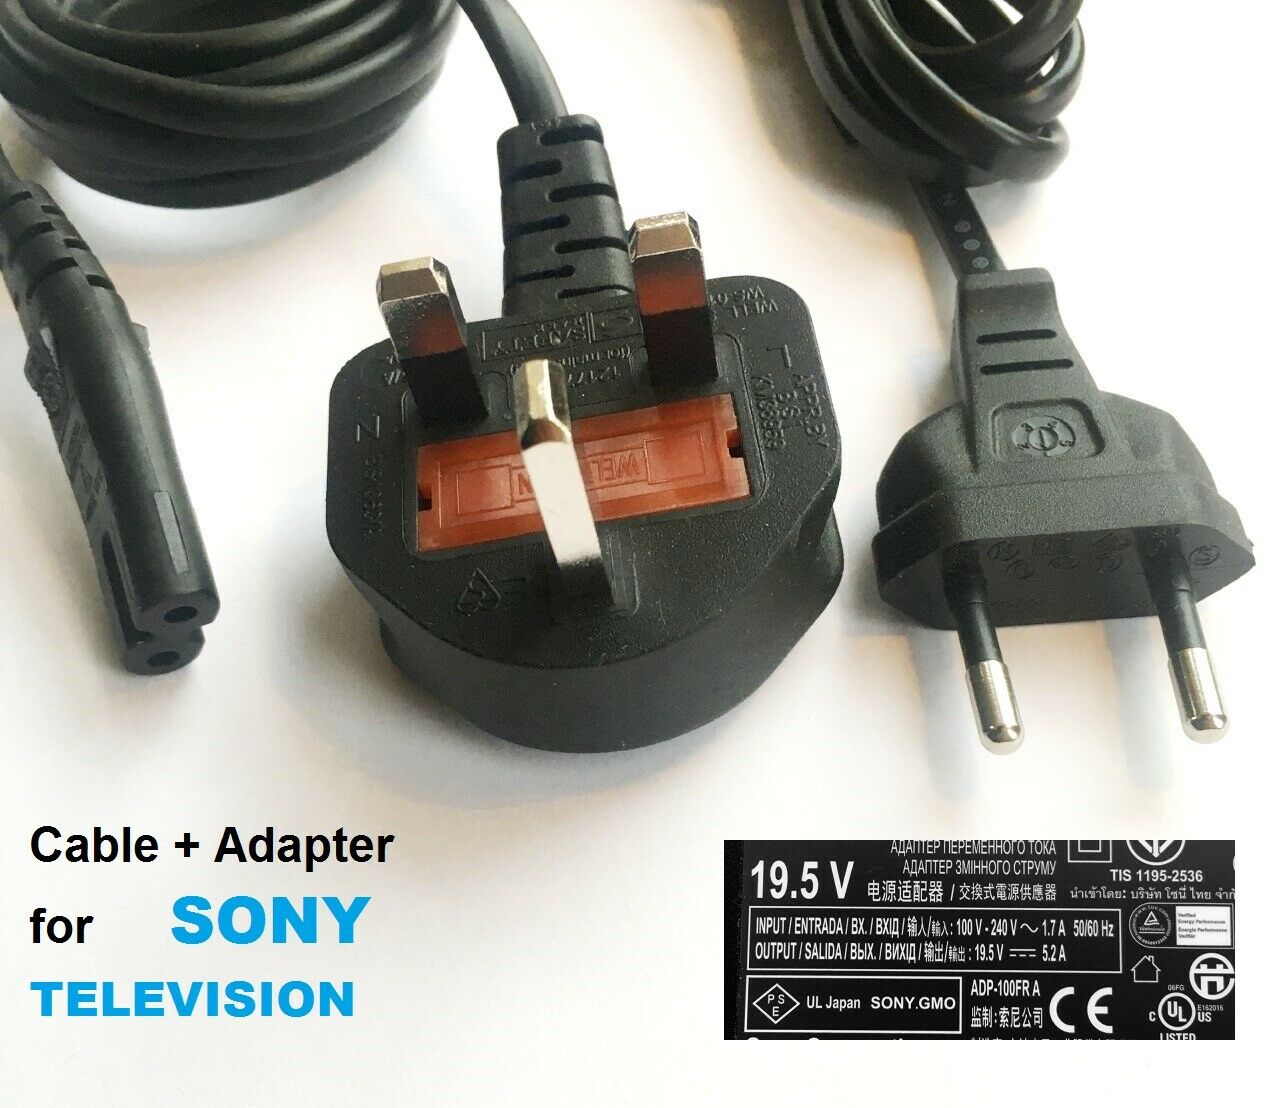 APDP-100A1/A, 19.5V 5.2A 100W, FOR SONY TV APDP-100A1/A, 19.5V 5.2A 100W, FOR SONY TV This power supply may also fit